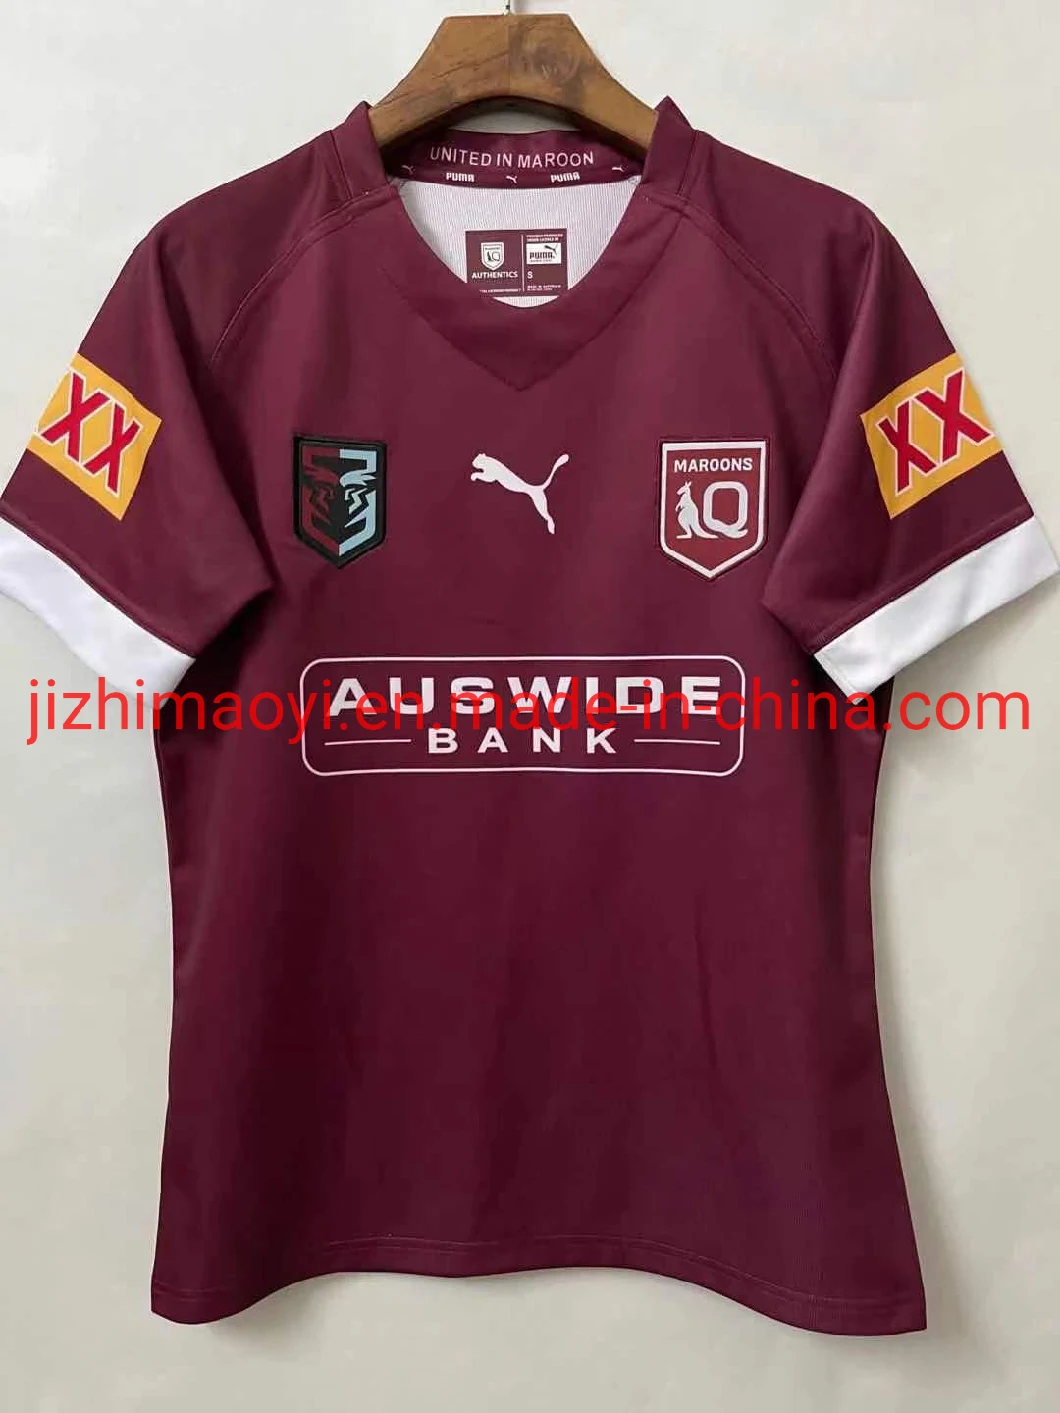 Wholesale 2021 Nrl Season Jersey Qld Maroons State of Origin Toddler Home Away Rugby Shirt